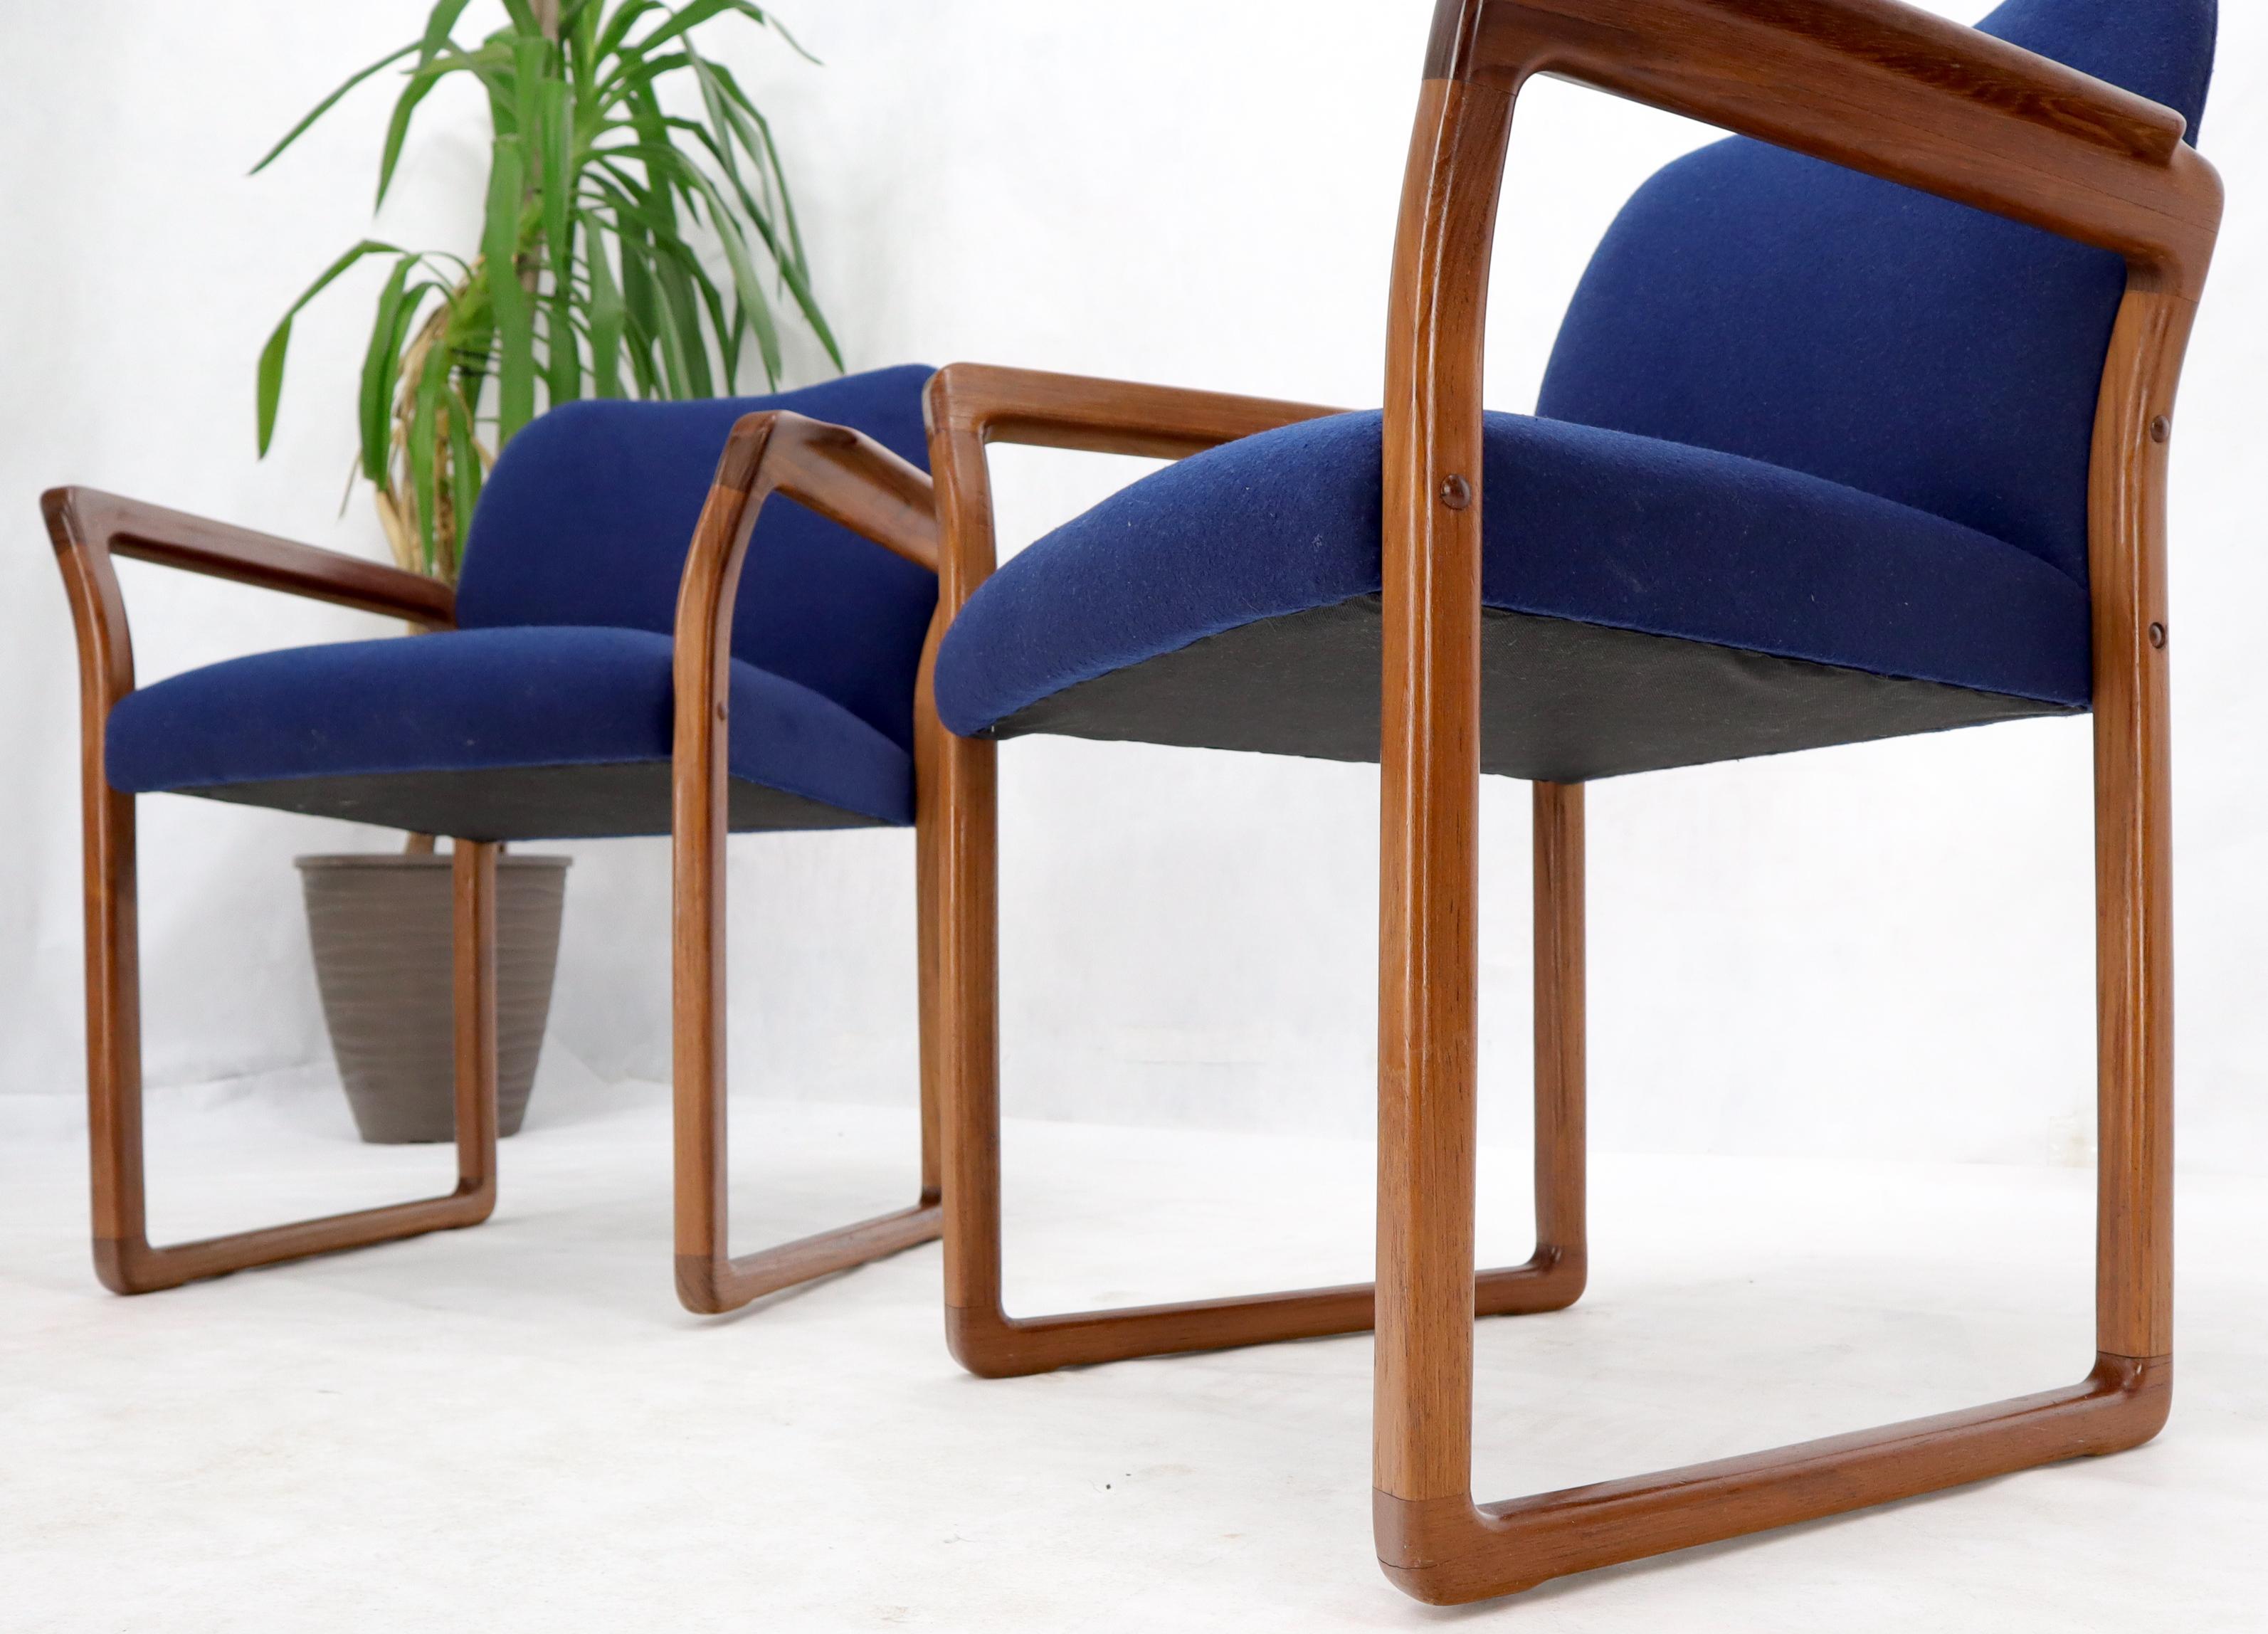 20th Century Pair of Danish Mid-Century Modern Teak Arms Chairs New Wool Upholstery For Sale